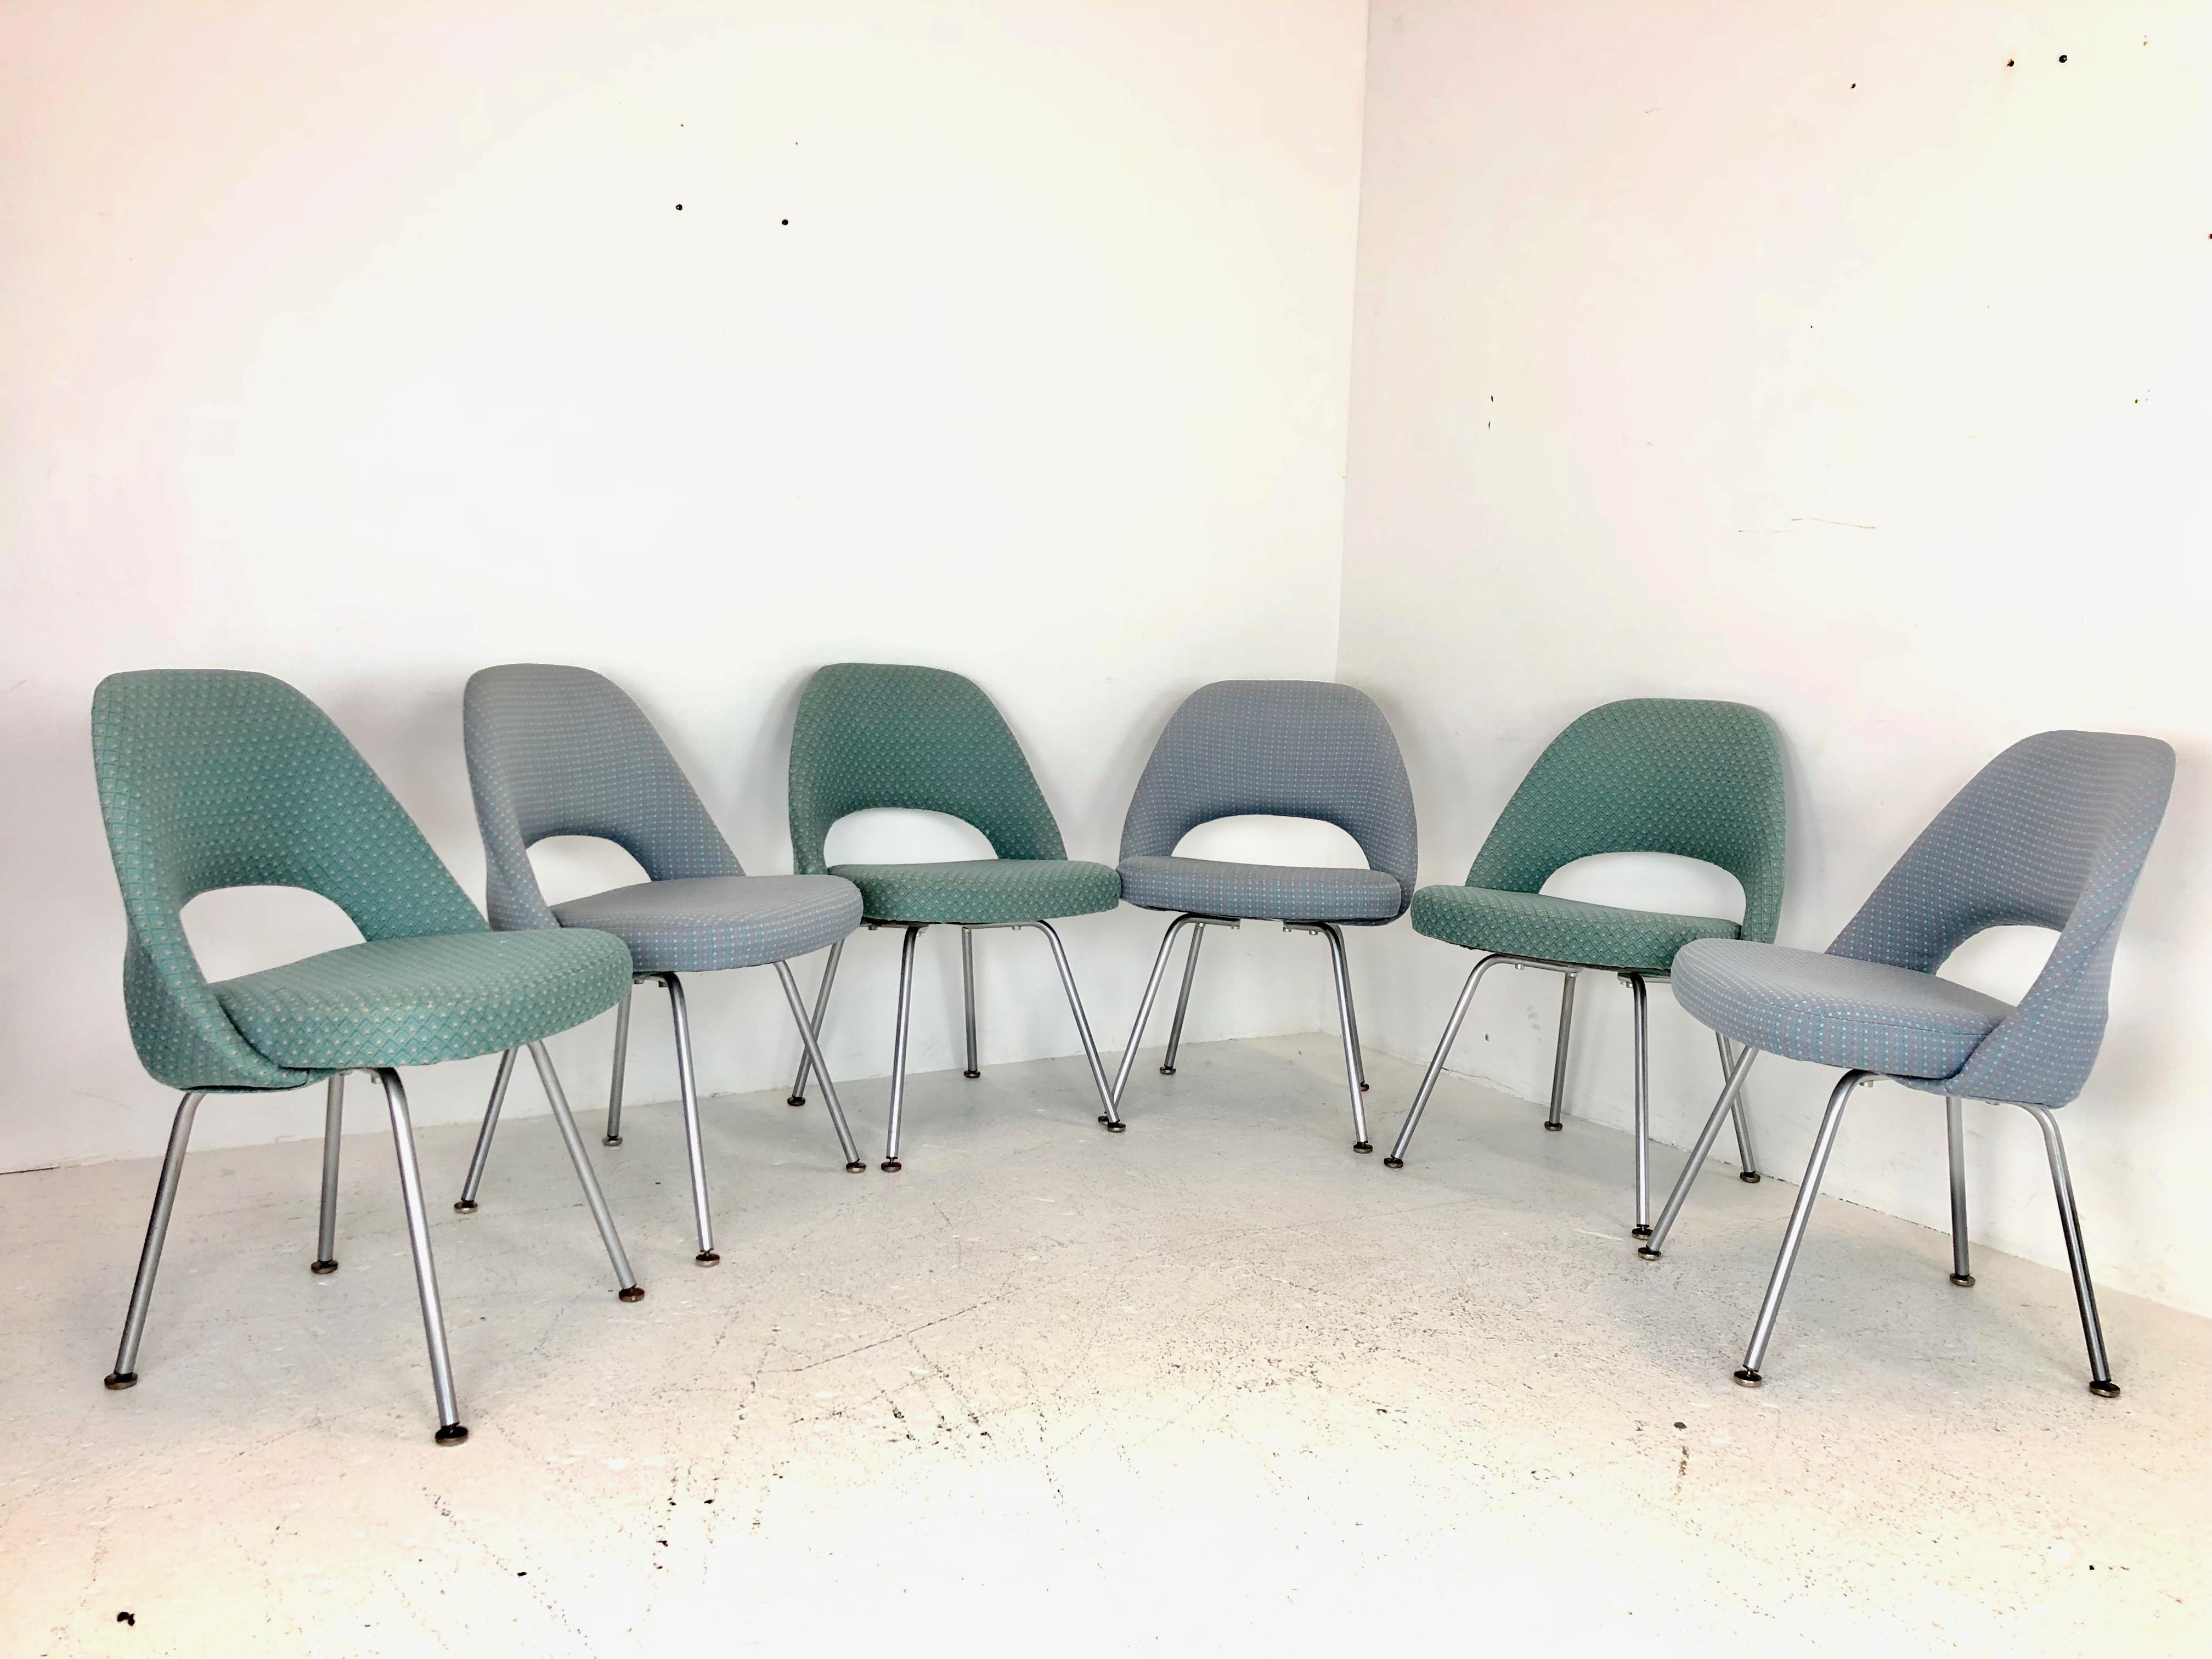 Set of six Saarinen executive chairs for Knoll. Chairs are upholstered in two different fabrics and recommend new upholstery.

Dimensions:
22 W x 20.5 D x 31 T
Seat height 19.